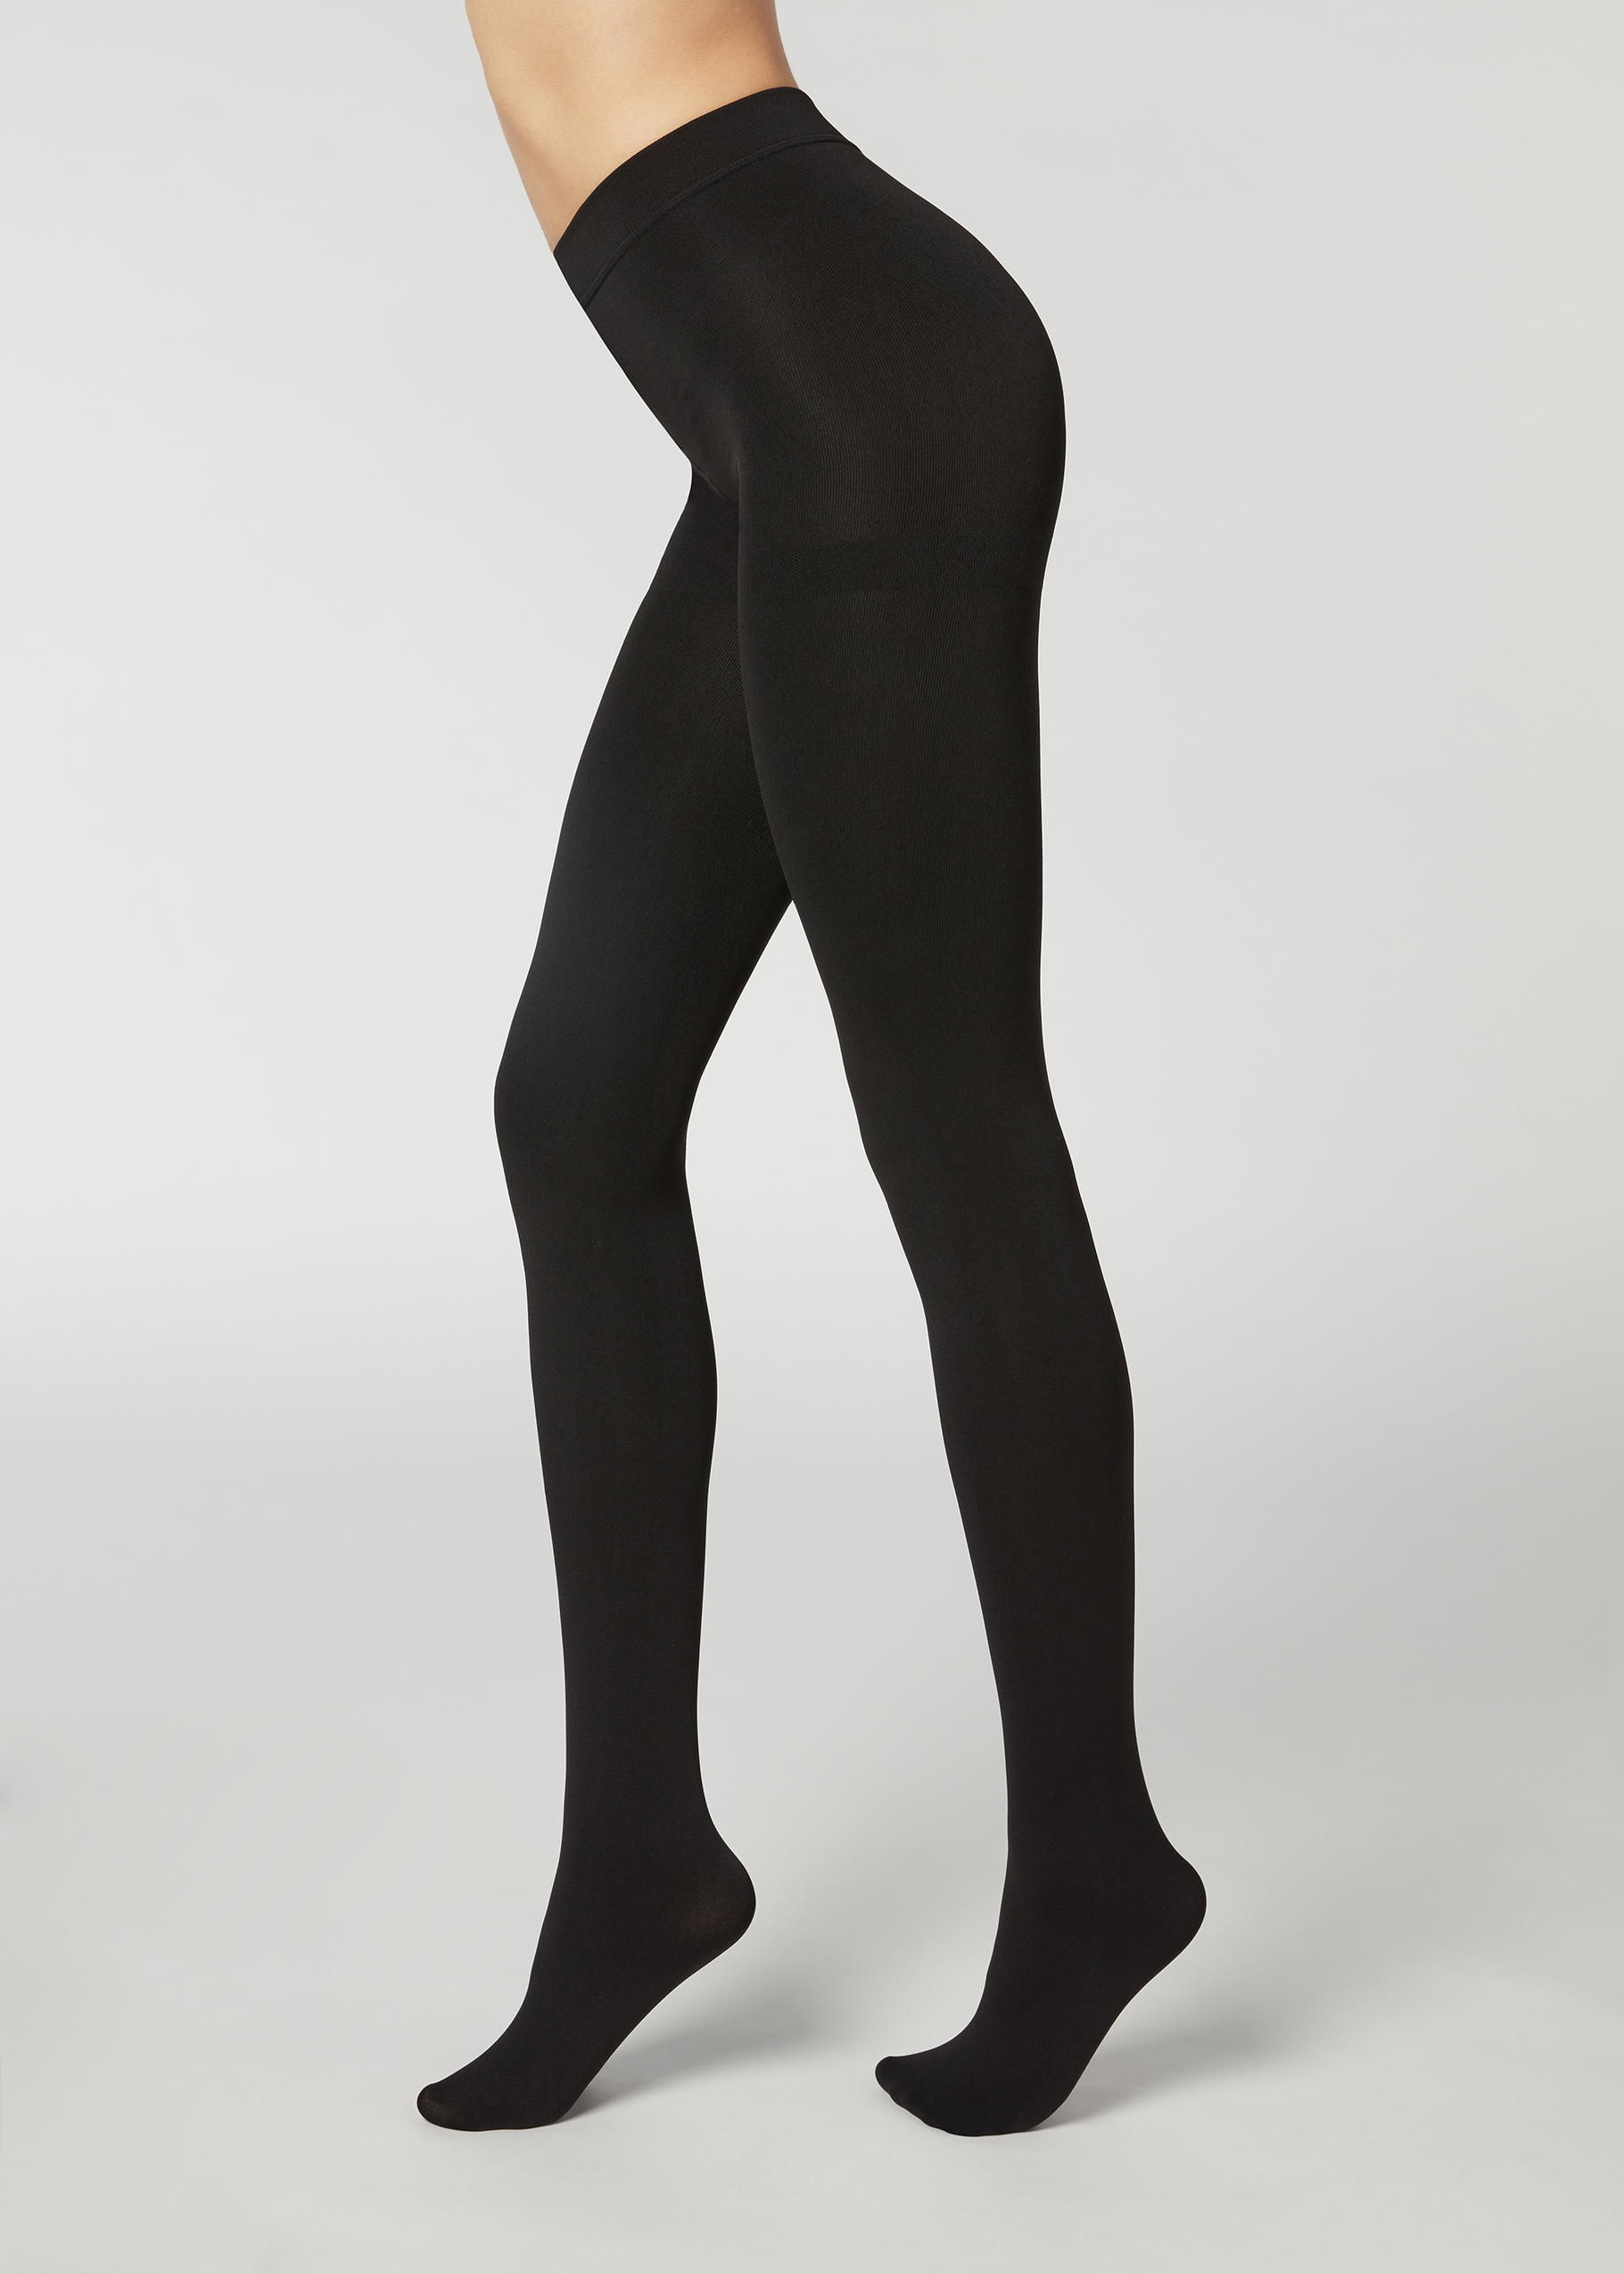 Collant Thermal Ultra Opacos - Collants opacos - Calzedonia